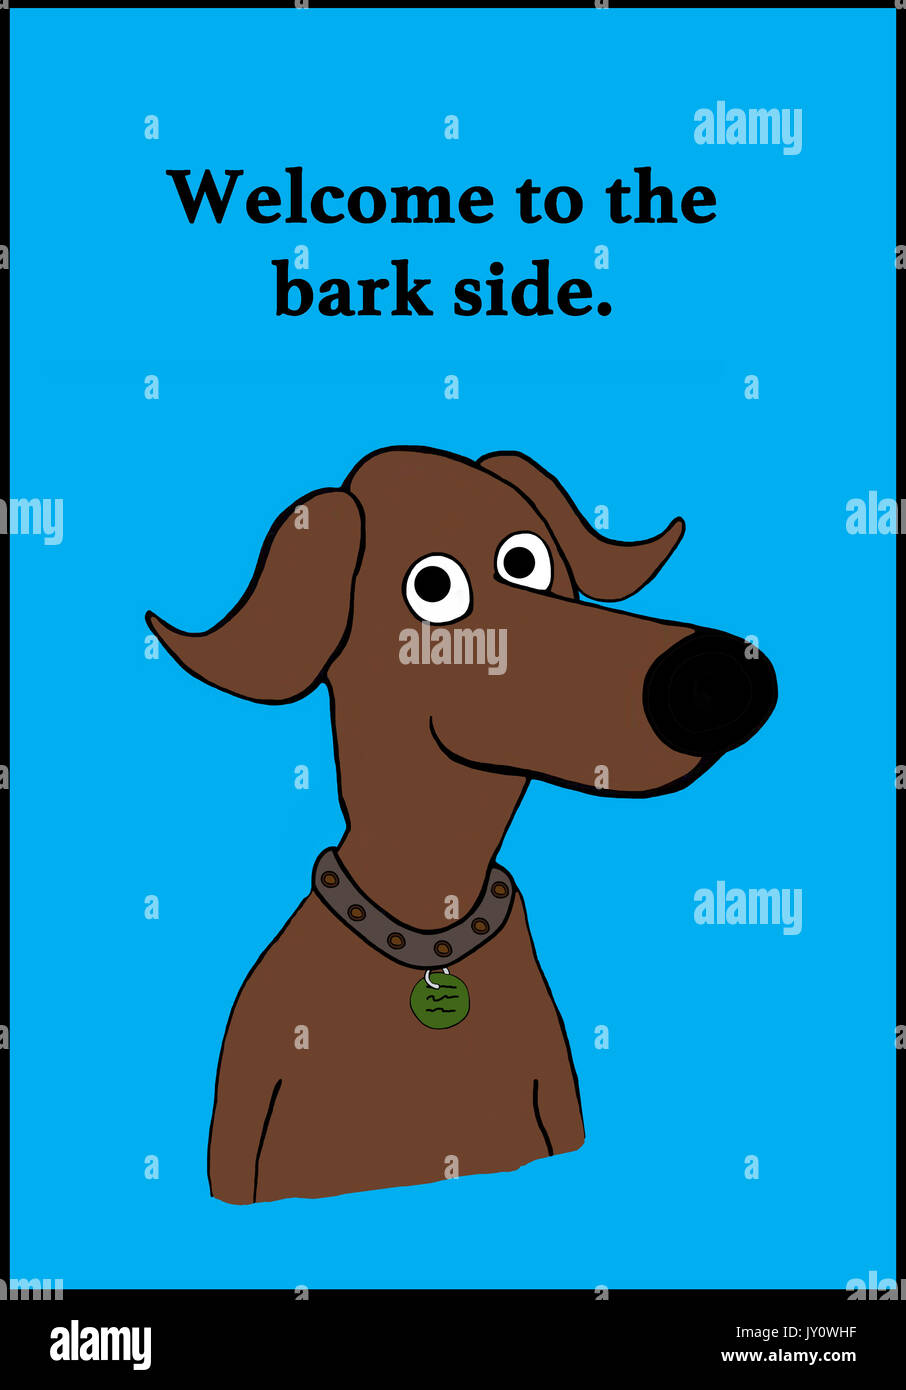 Cartoon illustration of a dog and a pun about dark side. Stock Photo